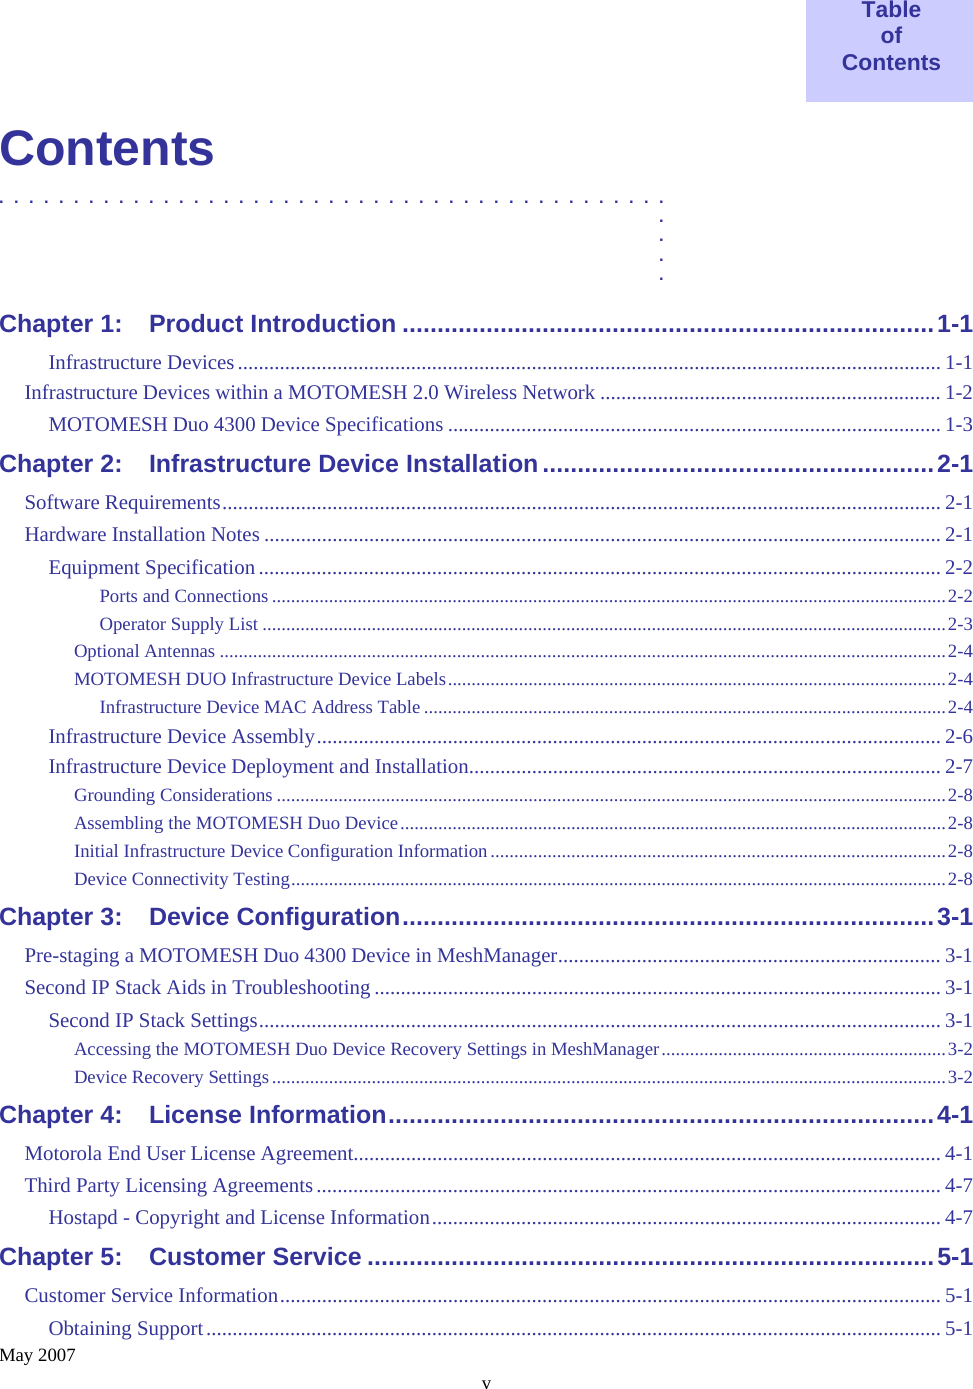    May 2007 v  Table of Contents  Contents .............................................  .  .  .  . Chapter 1: Product Introduction ............................................................................1-1 Infrastructure Devices...................................................................................................................................... 1-1 Infrastructure Devices within a MOTOMESH 2.0 Wireless Network ................................................................. 1-2 MOTOMESH Duo 4300 Device Specifications .............................................................................................. 1-3 Chapter 2: Infrastructure Device Installation........................................................2-1 Software Requirements......................................................................................................................................... 2-1 Hardware Installation Notes ................................................................................................................................. 2-1 Equipment Specification .................................................................................................................................. 2-2 Ports and Connections ..............................................................................................................................................2-2 Operator Supply List ................................................................................................................................................2-3 Optional Antennas .........................................................................................................................................................2-4 MOTOMESH DUO Infrastructure Device Labels.........................................................................................................2-4 Infrastructure Device MAC Address Table ..............................................................................................................2-4 Infrastructure Device Assembly....................................................................................................................... 2-6 Infrastructure Device Deployment and Installation.......................................................................................... 2-7 Grounding Considerations .............................................................................................................................................2-8 Assembling the MOTOMESH Duo Device...................................................................................................................2-8 Initial Infrastructure Device Configuration Information ................................................................................................2-8 Device Connectivity Testing..........................................................................................................................................2-8 Chapter 3: Device Configuration............................................................................3-1 Pre-staging a MOTOMESH Duo 4300 Device in MeshManager......................................................................... 3-1 Second IP Stack Aids in Troubleshooting ............................................................................................................ 3-1 Second IP Stack Settings.................................................................................................................................. 3-1 Accessing the MOTOMESH Duo Device Recovery Settings in MeshManager............................................................3-2 Device Recovery Settings ..............................................................................................................................................3-2 Chapter 4: License Information..............................................................................4-1 Motorola End User License Agreement................................................................................................................ 4-1 Third Party Licensing Agreements....................................................................................................................... 4-7 Hostapd - Copyright and License Information................................................................................................. 4-7 Chapter 5: Customer Service .................................................................................5-1 Customer Service Information.............................................................................................................................. 5-1 Obtaining Support............................................................................................................................................ 5-1 